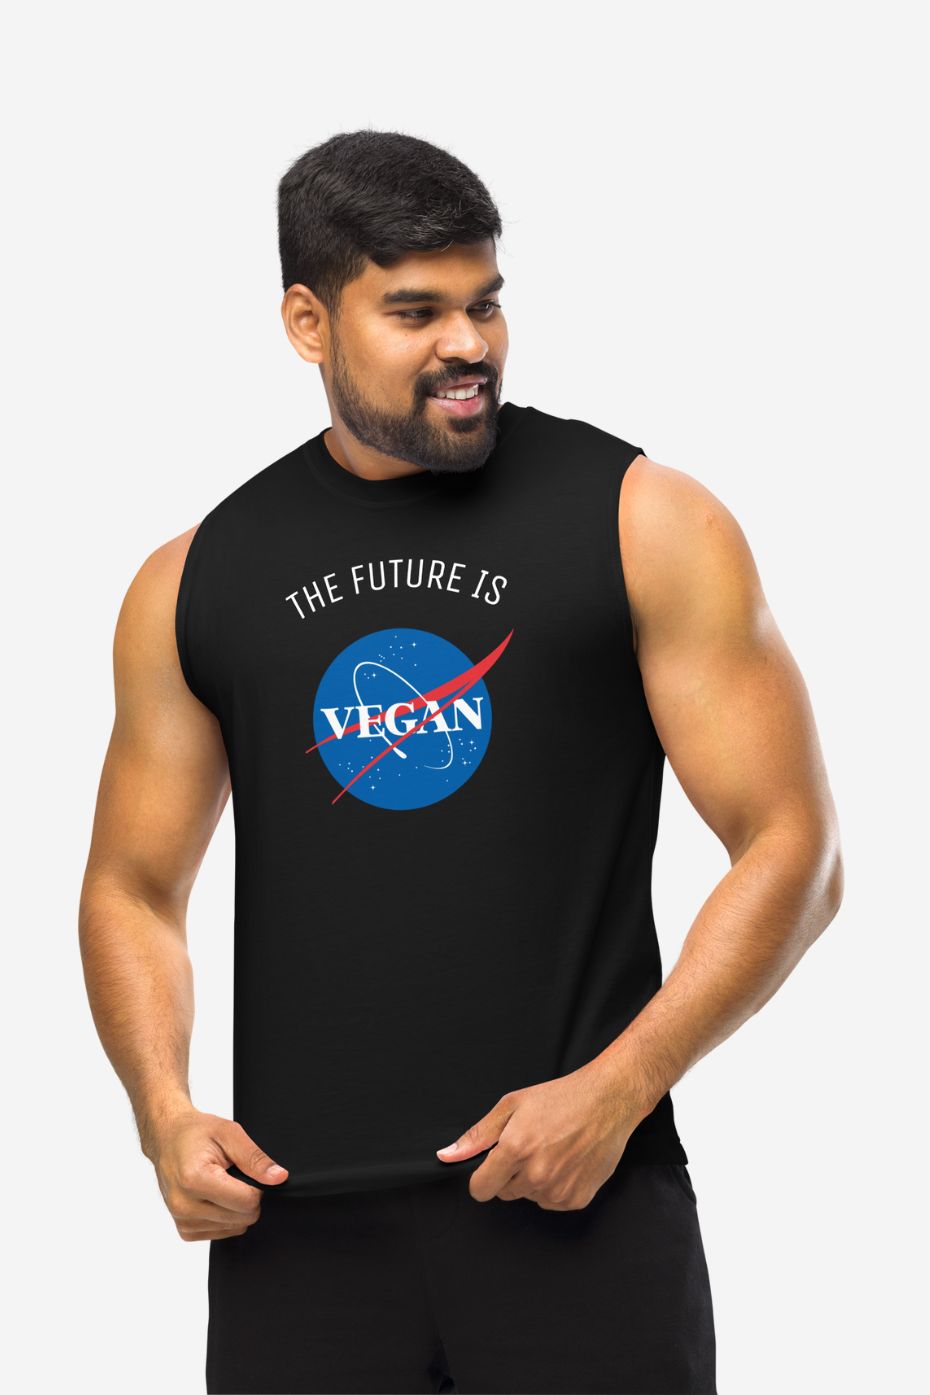 The Future is Vegan - Unisex Muscle Shirt